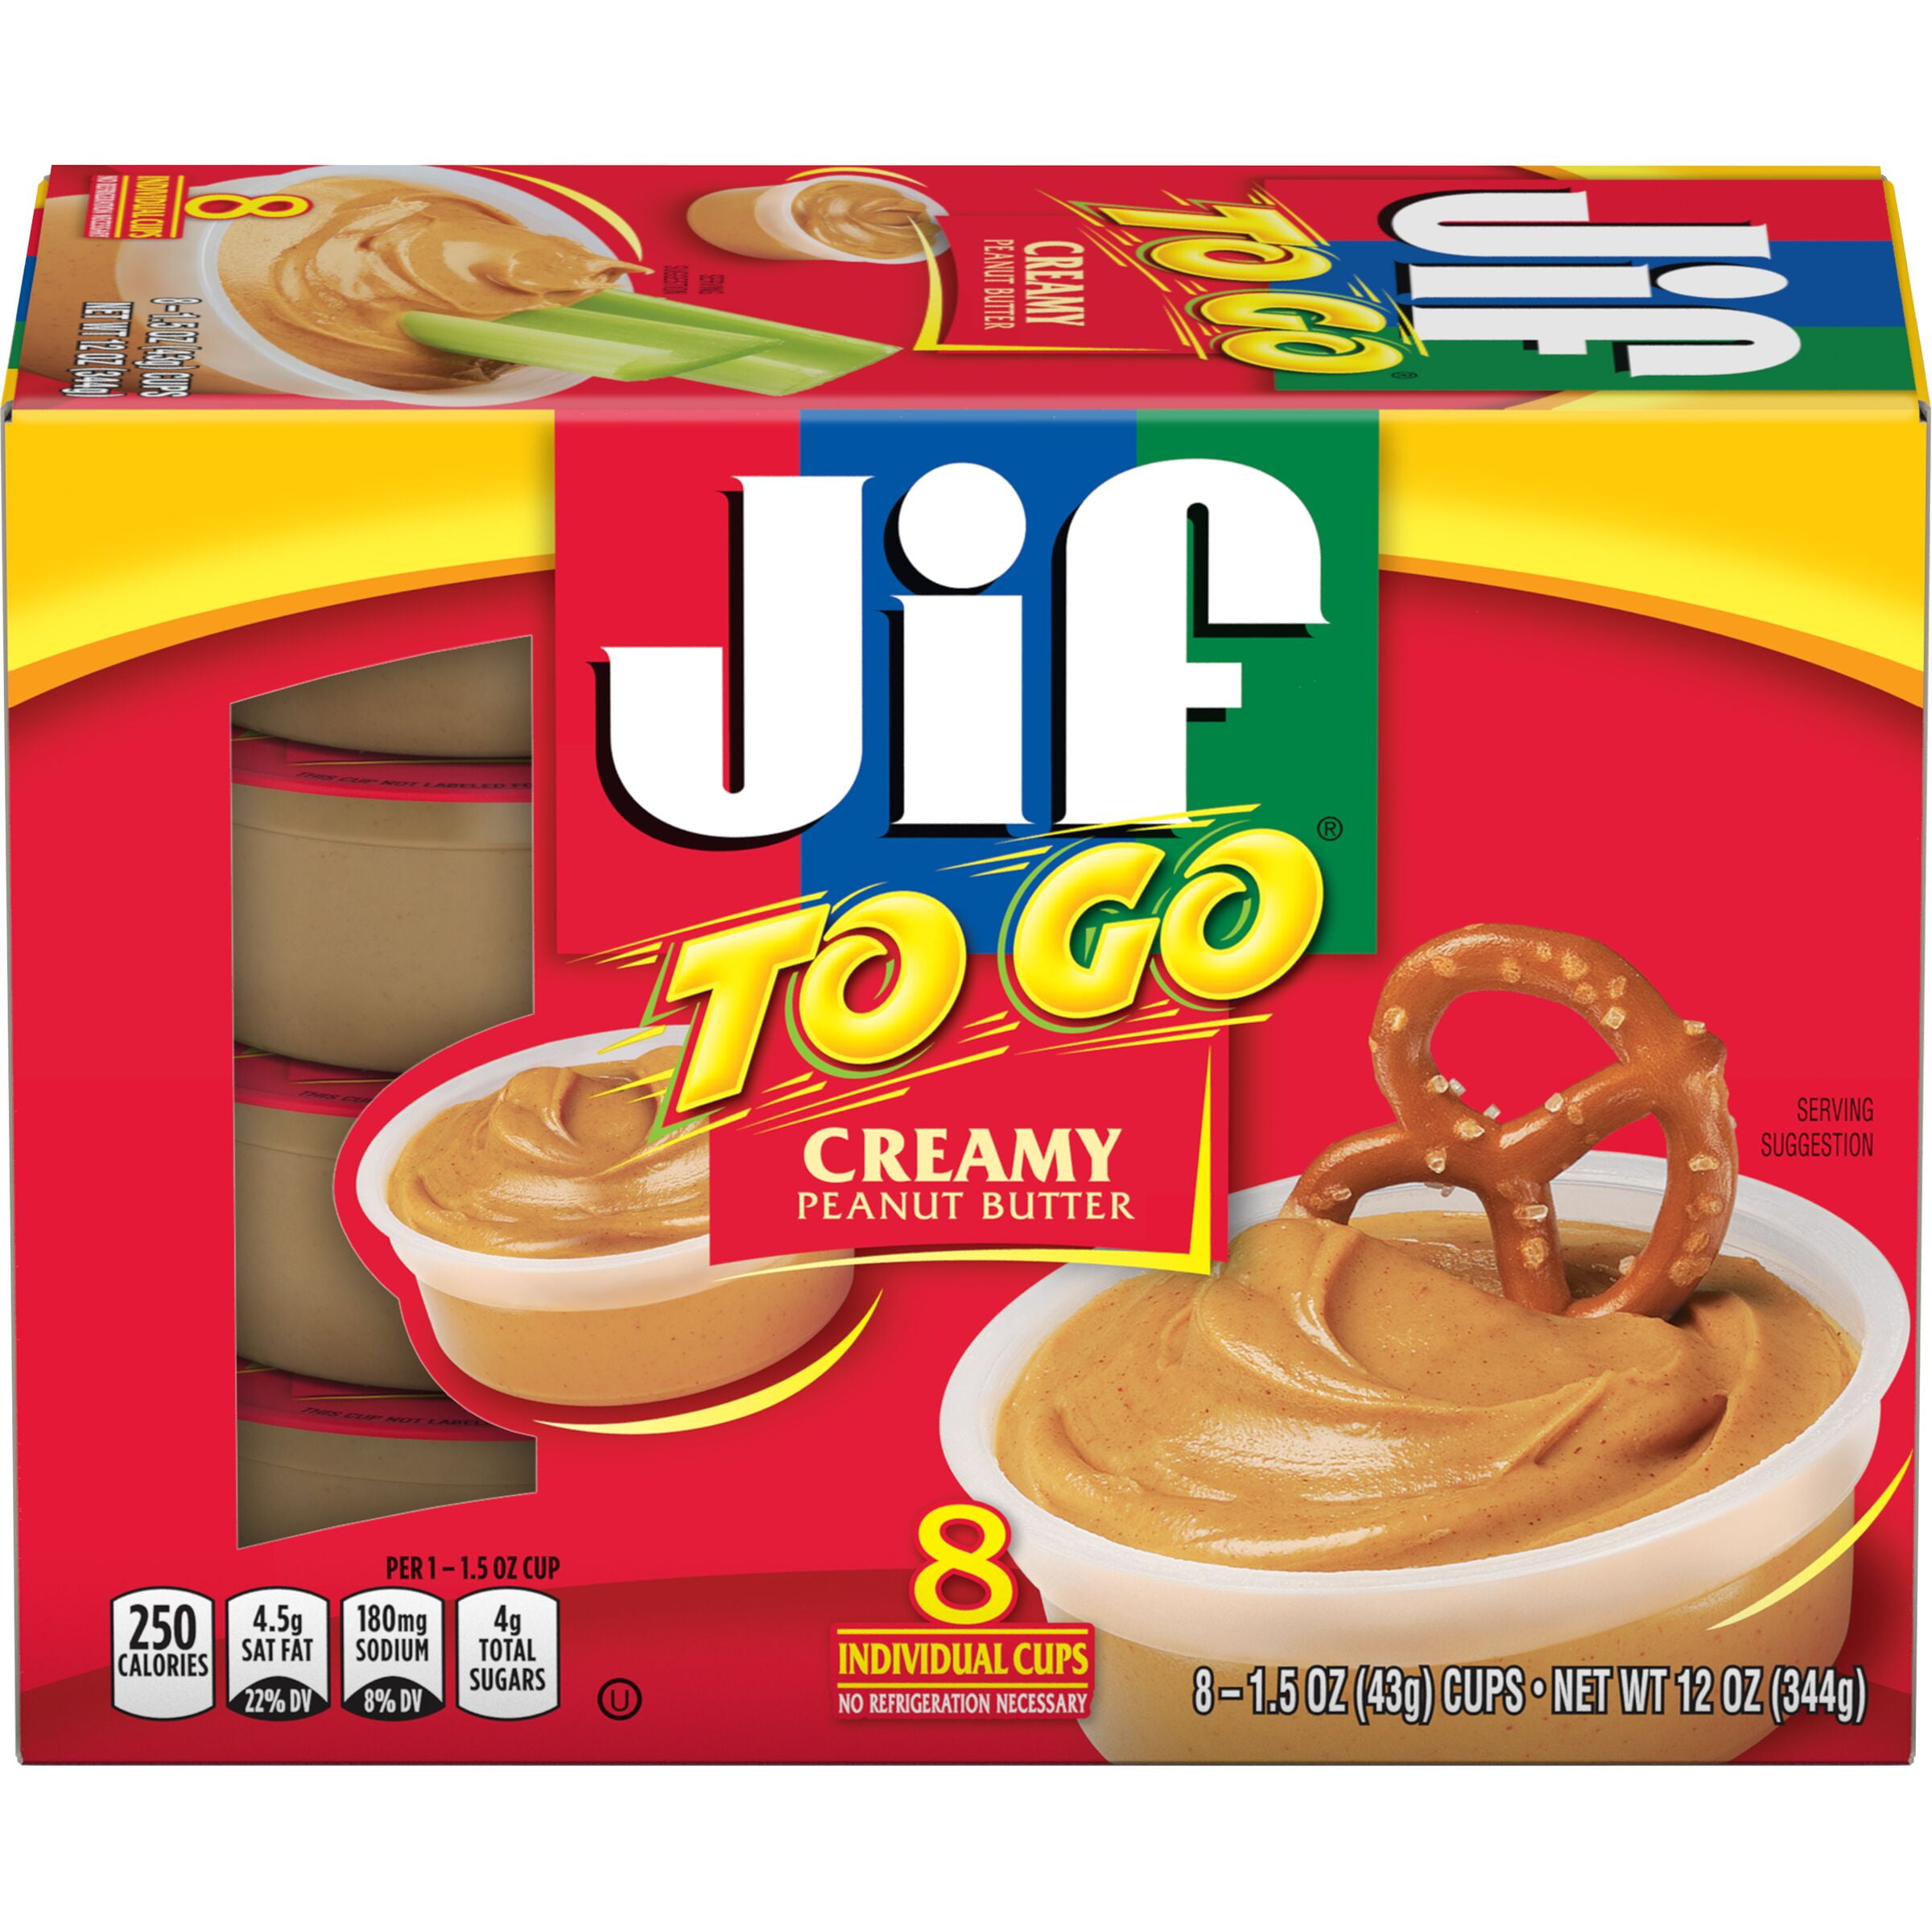 Jif To Go Creamy Peanut Butter, 8- 1.5 oz Cups, Snack Size Packs